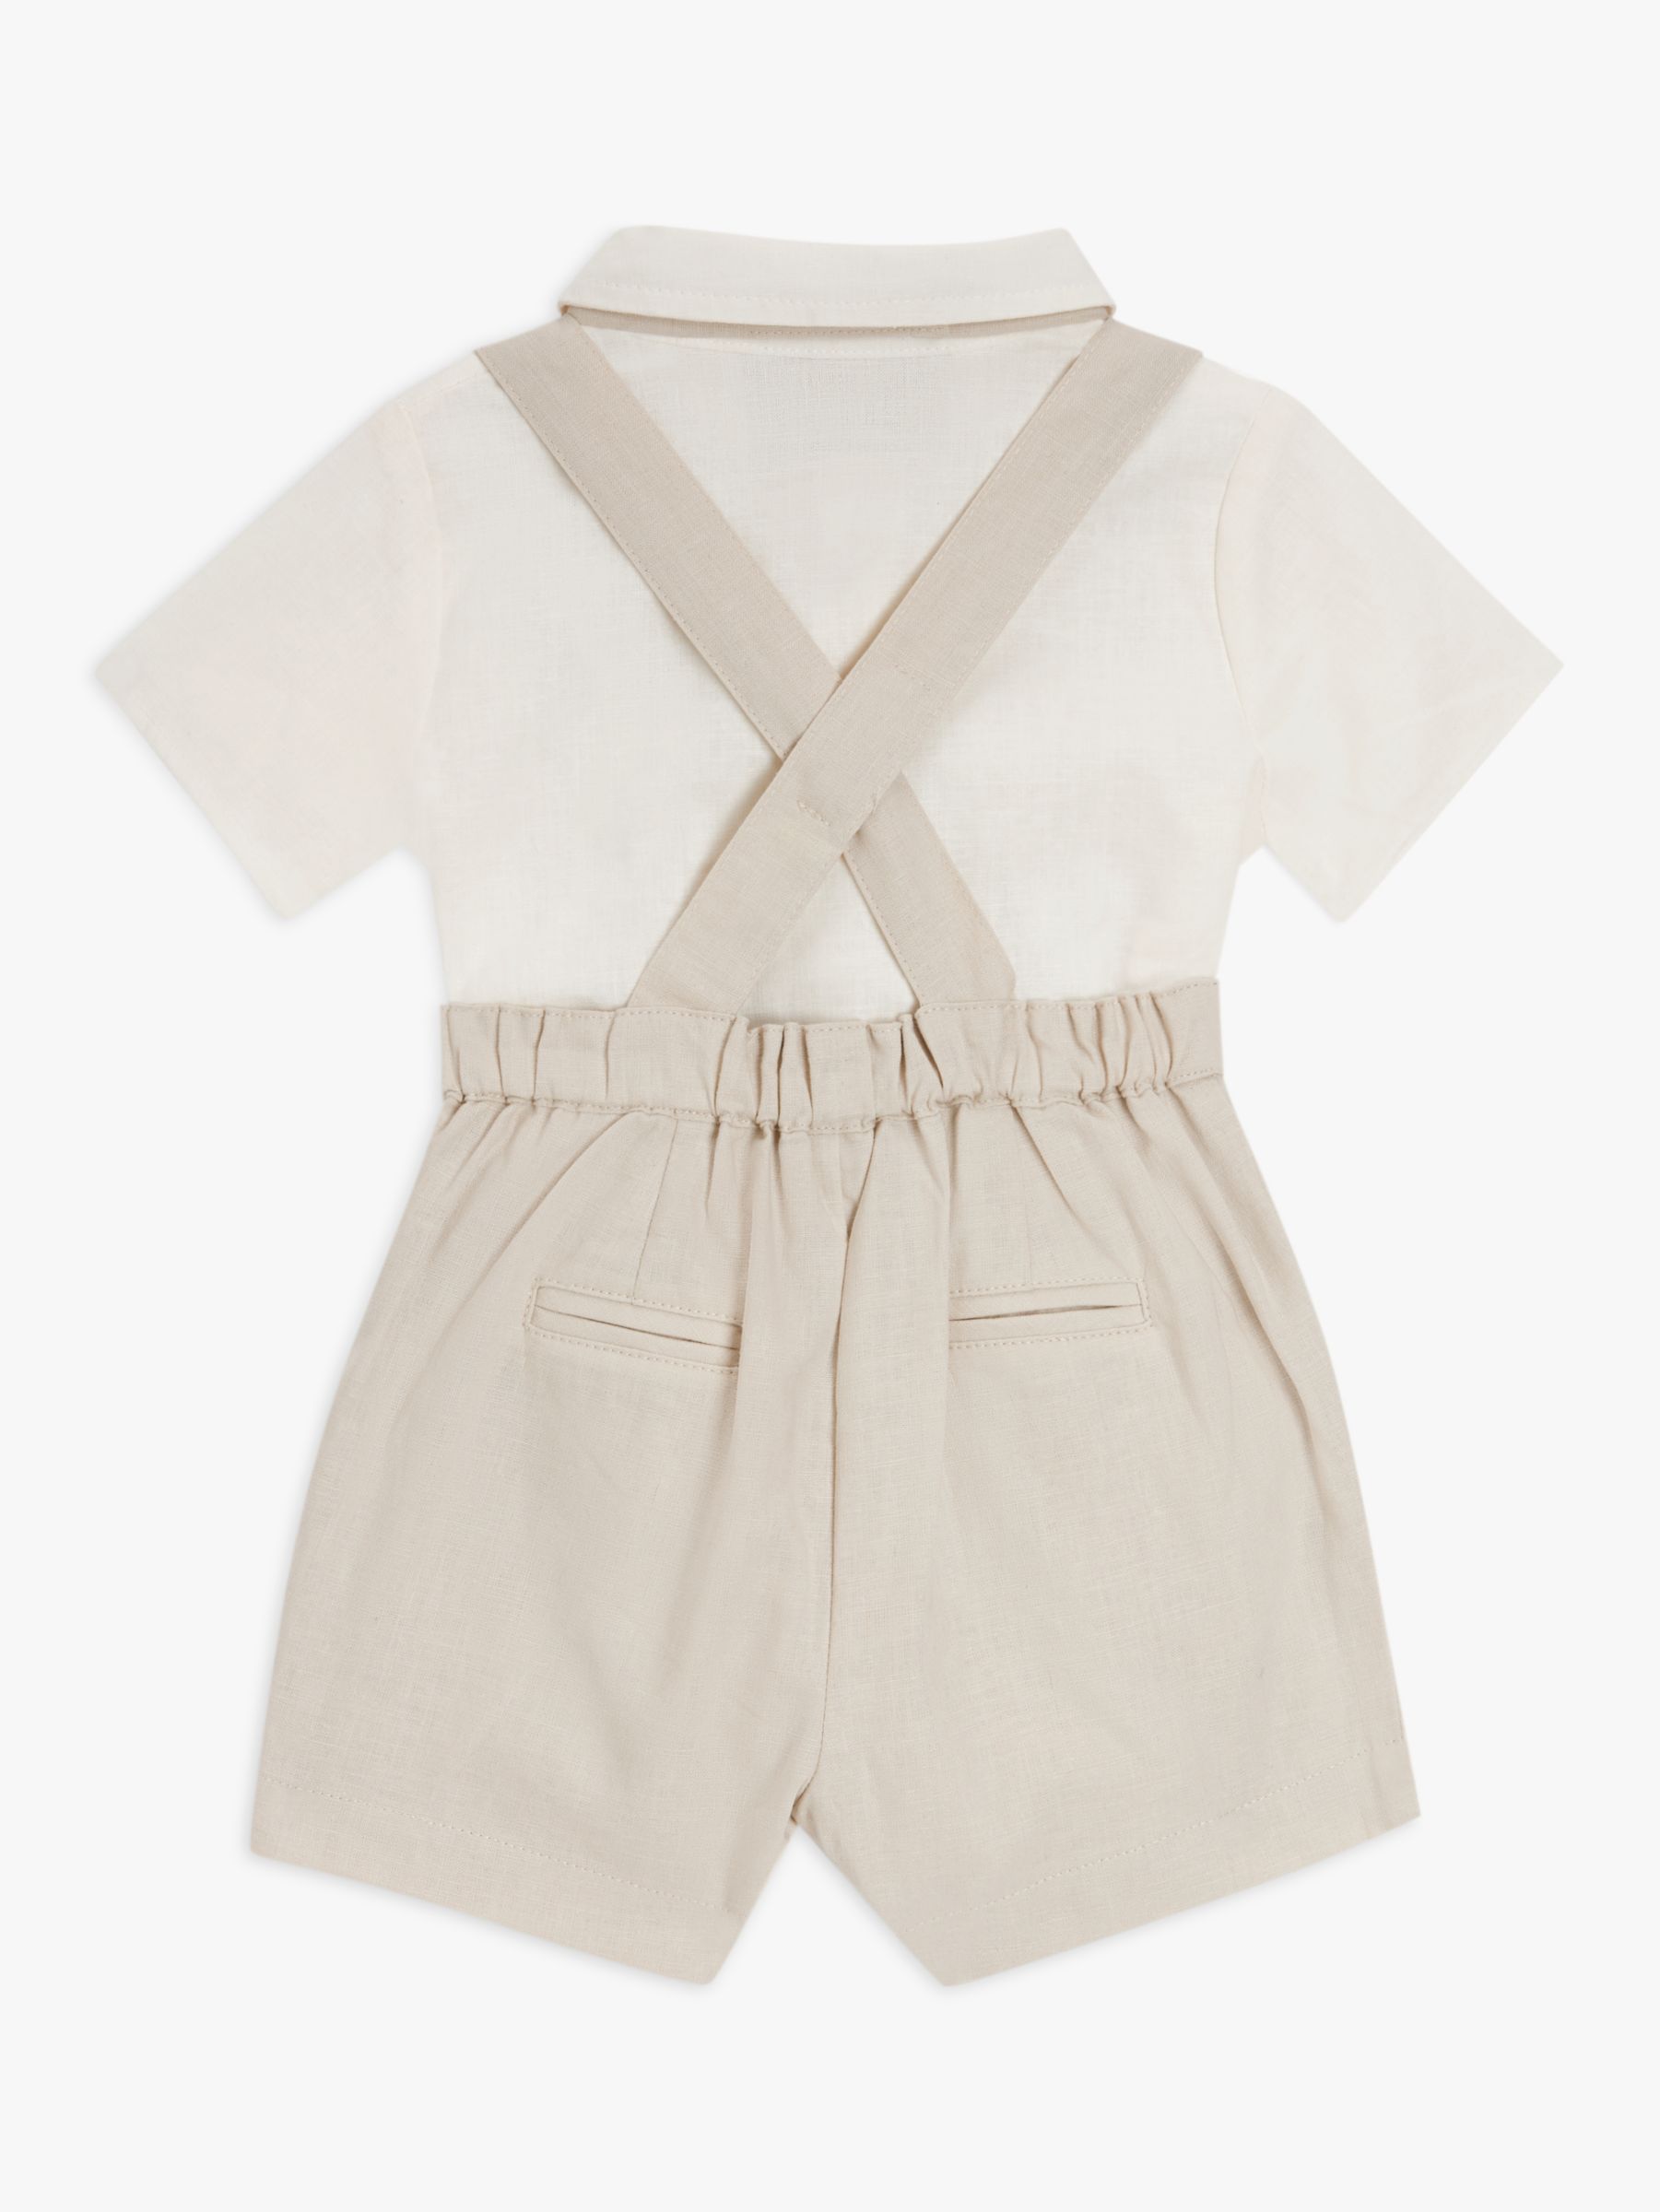 Buy John Lewis Heirloom Collection Baby Linen Bodysuit and Braces Set, White Online at johnlewis.com